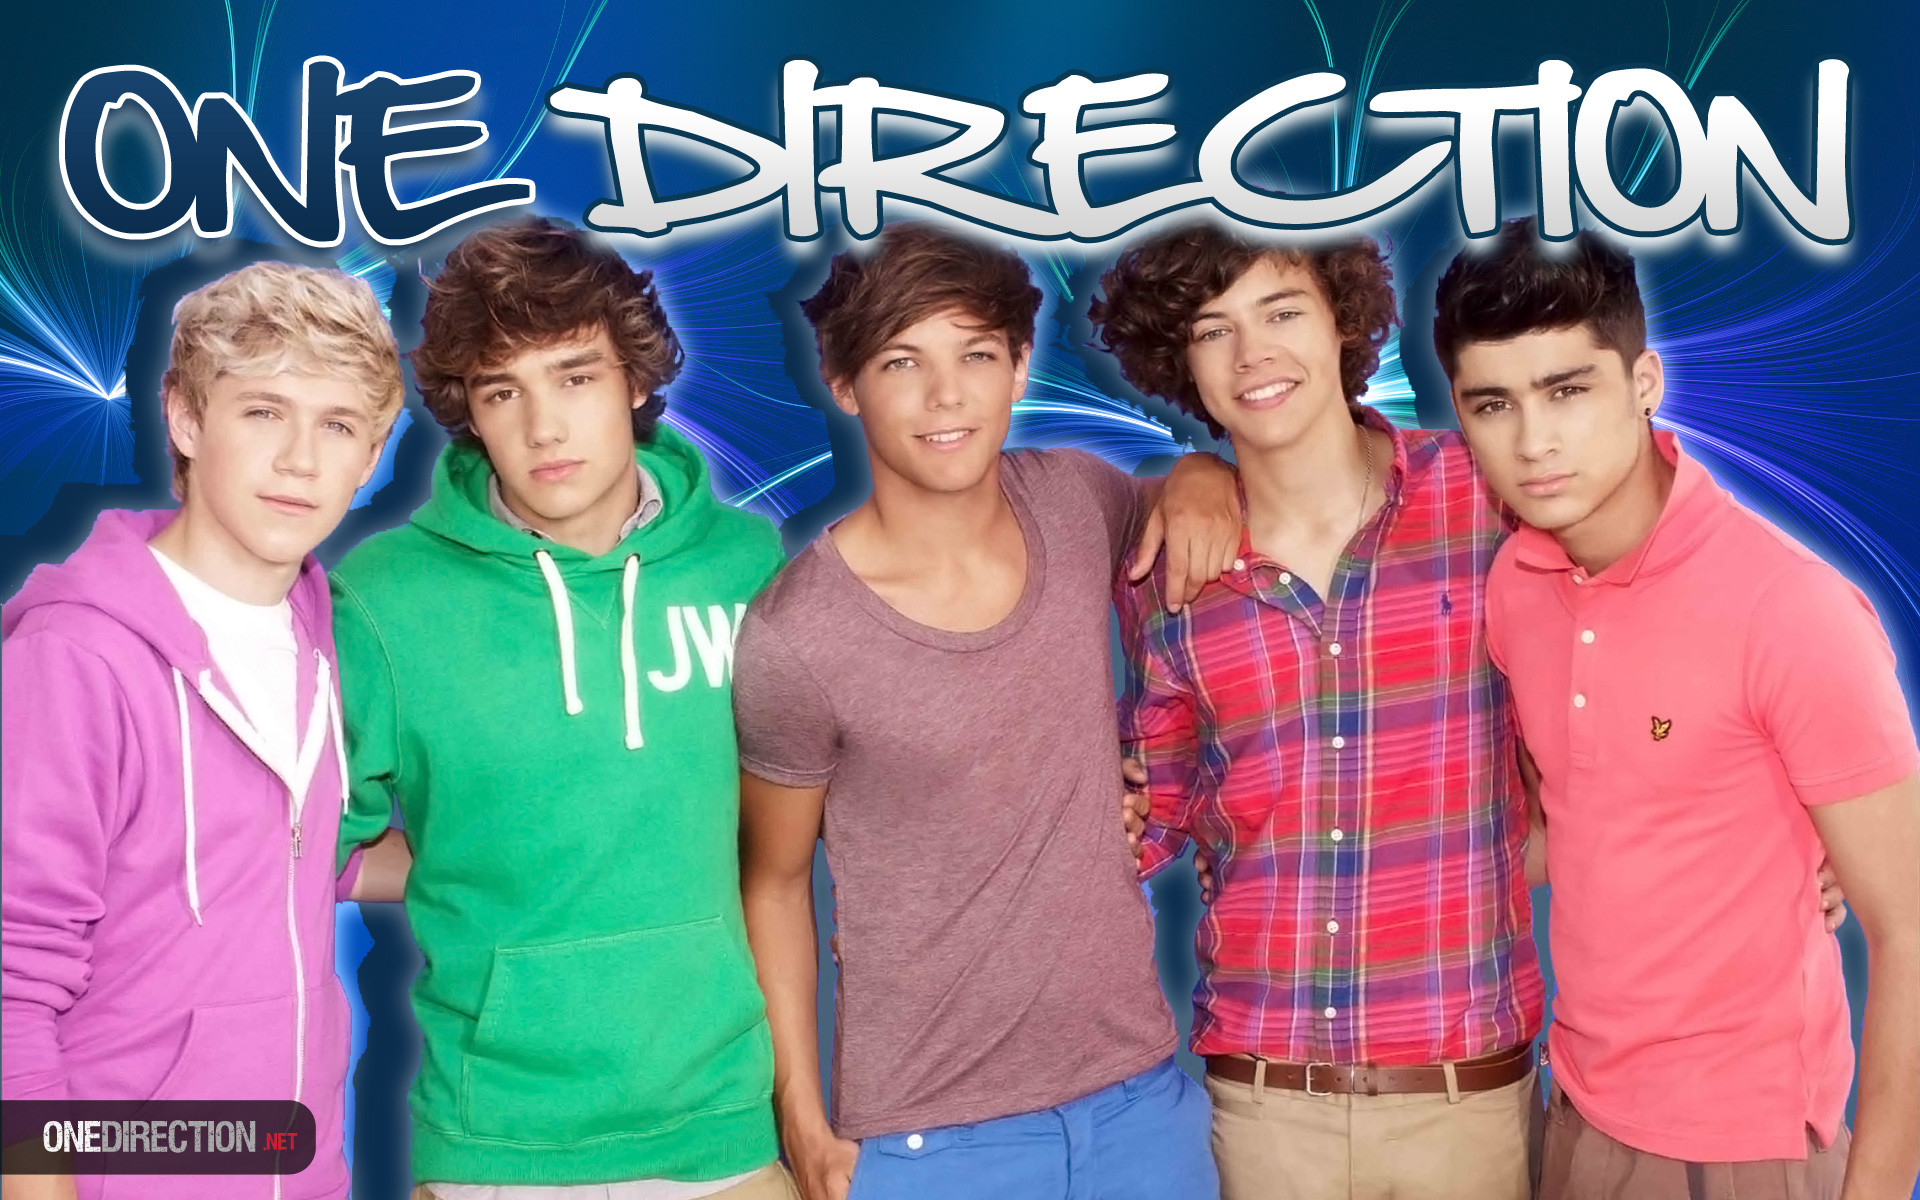 1920x1200 One Direction - One Direction Wallpaper (32432599) - Fanpop